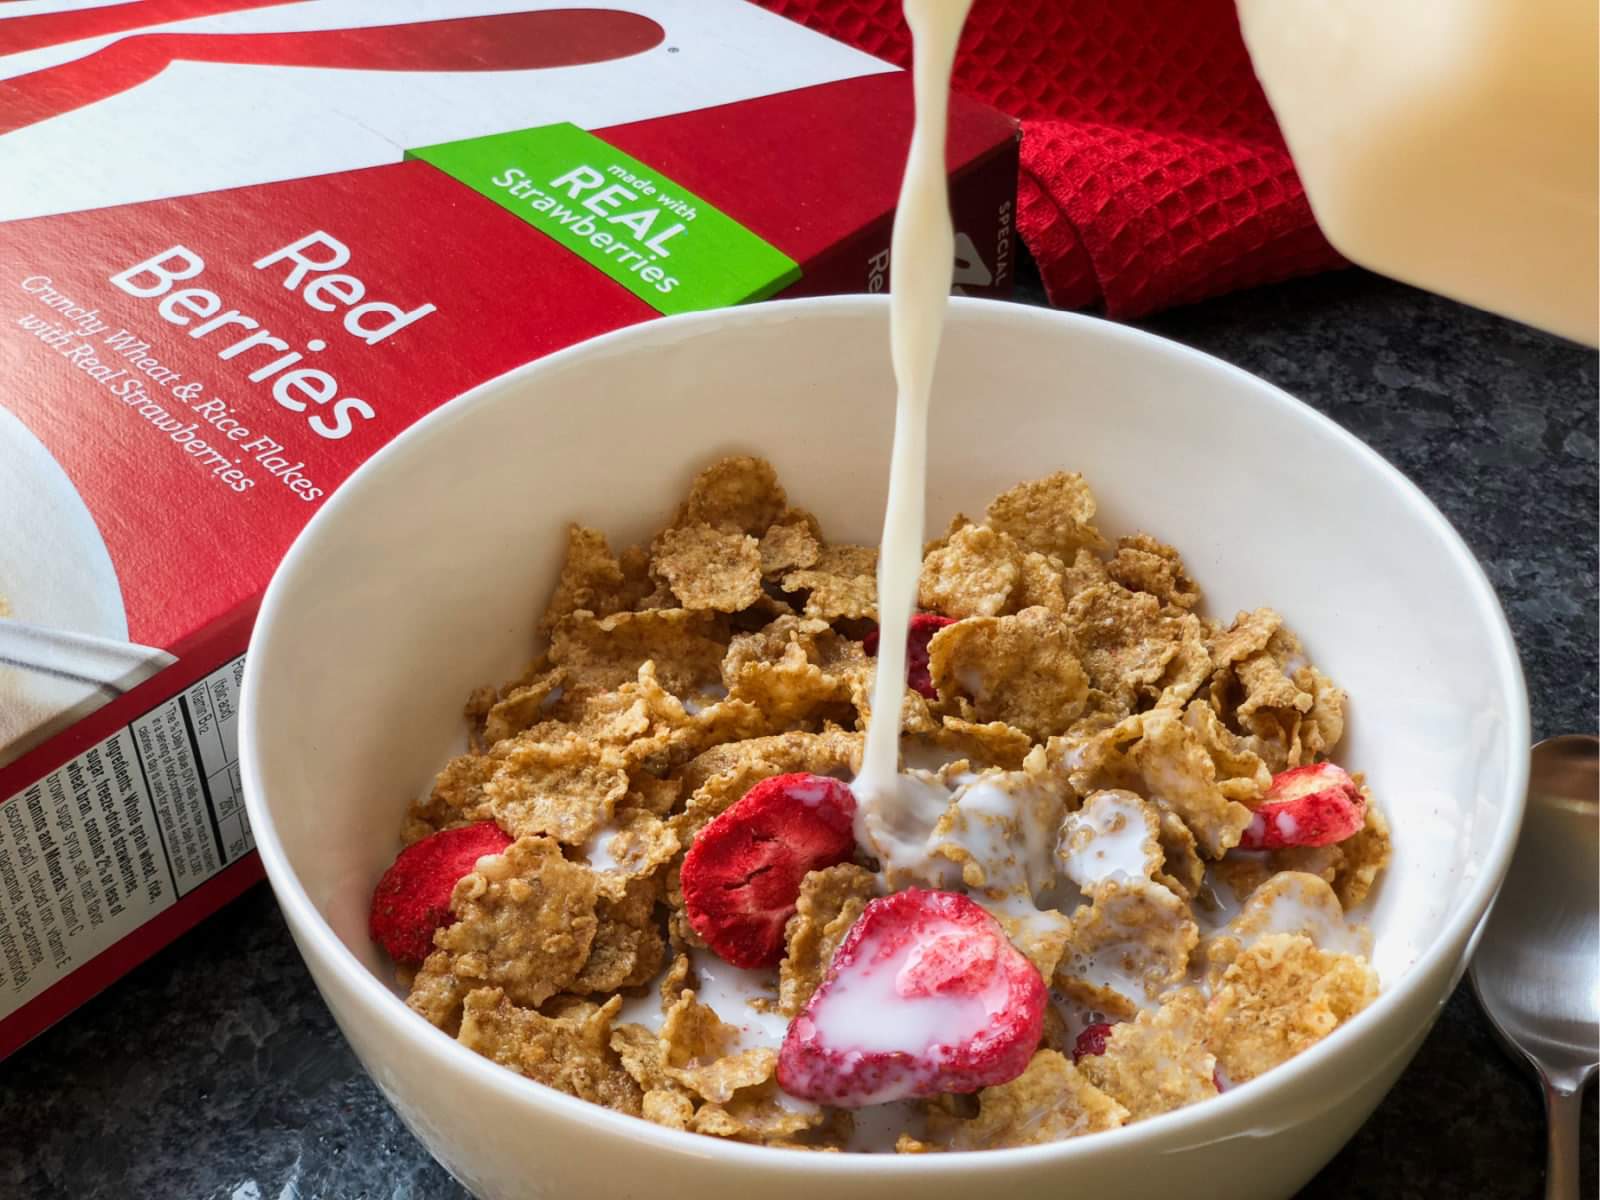 Get Boxes Of Kellogg’s Special K Cereal For As Low As $1.57 At Publix